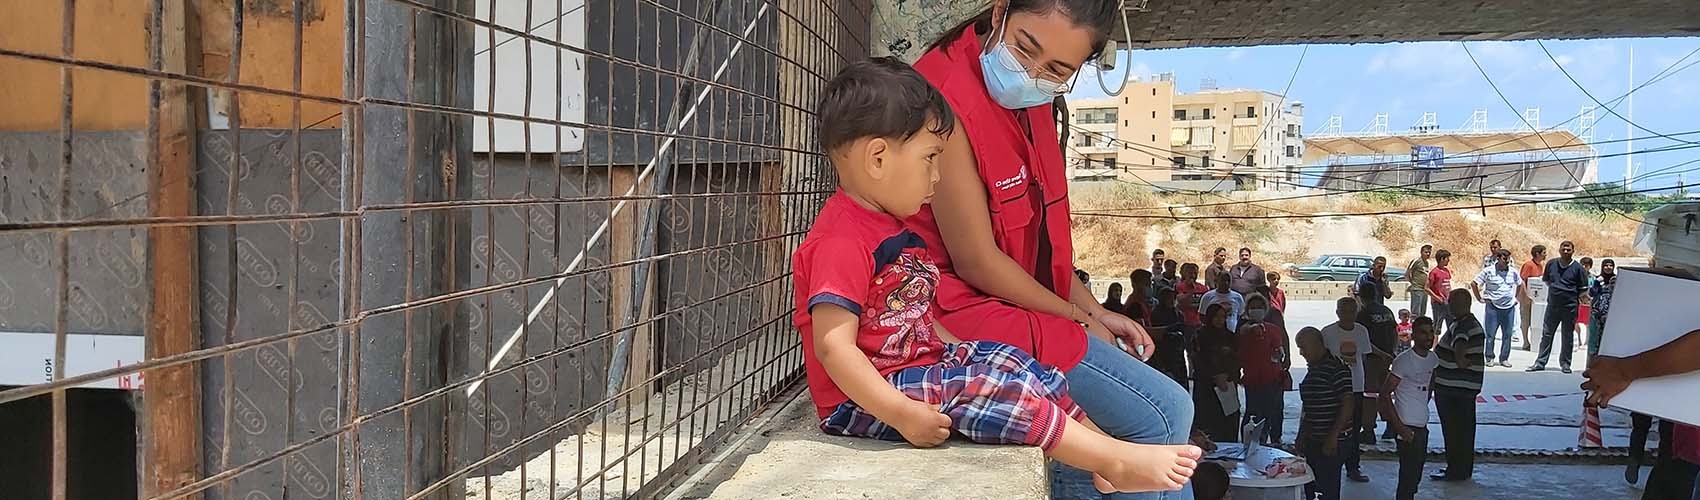 In Lebanon, a health worker wears a face mask while sitting besides a young boy on a ledge overlooking the town.